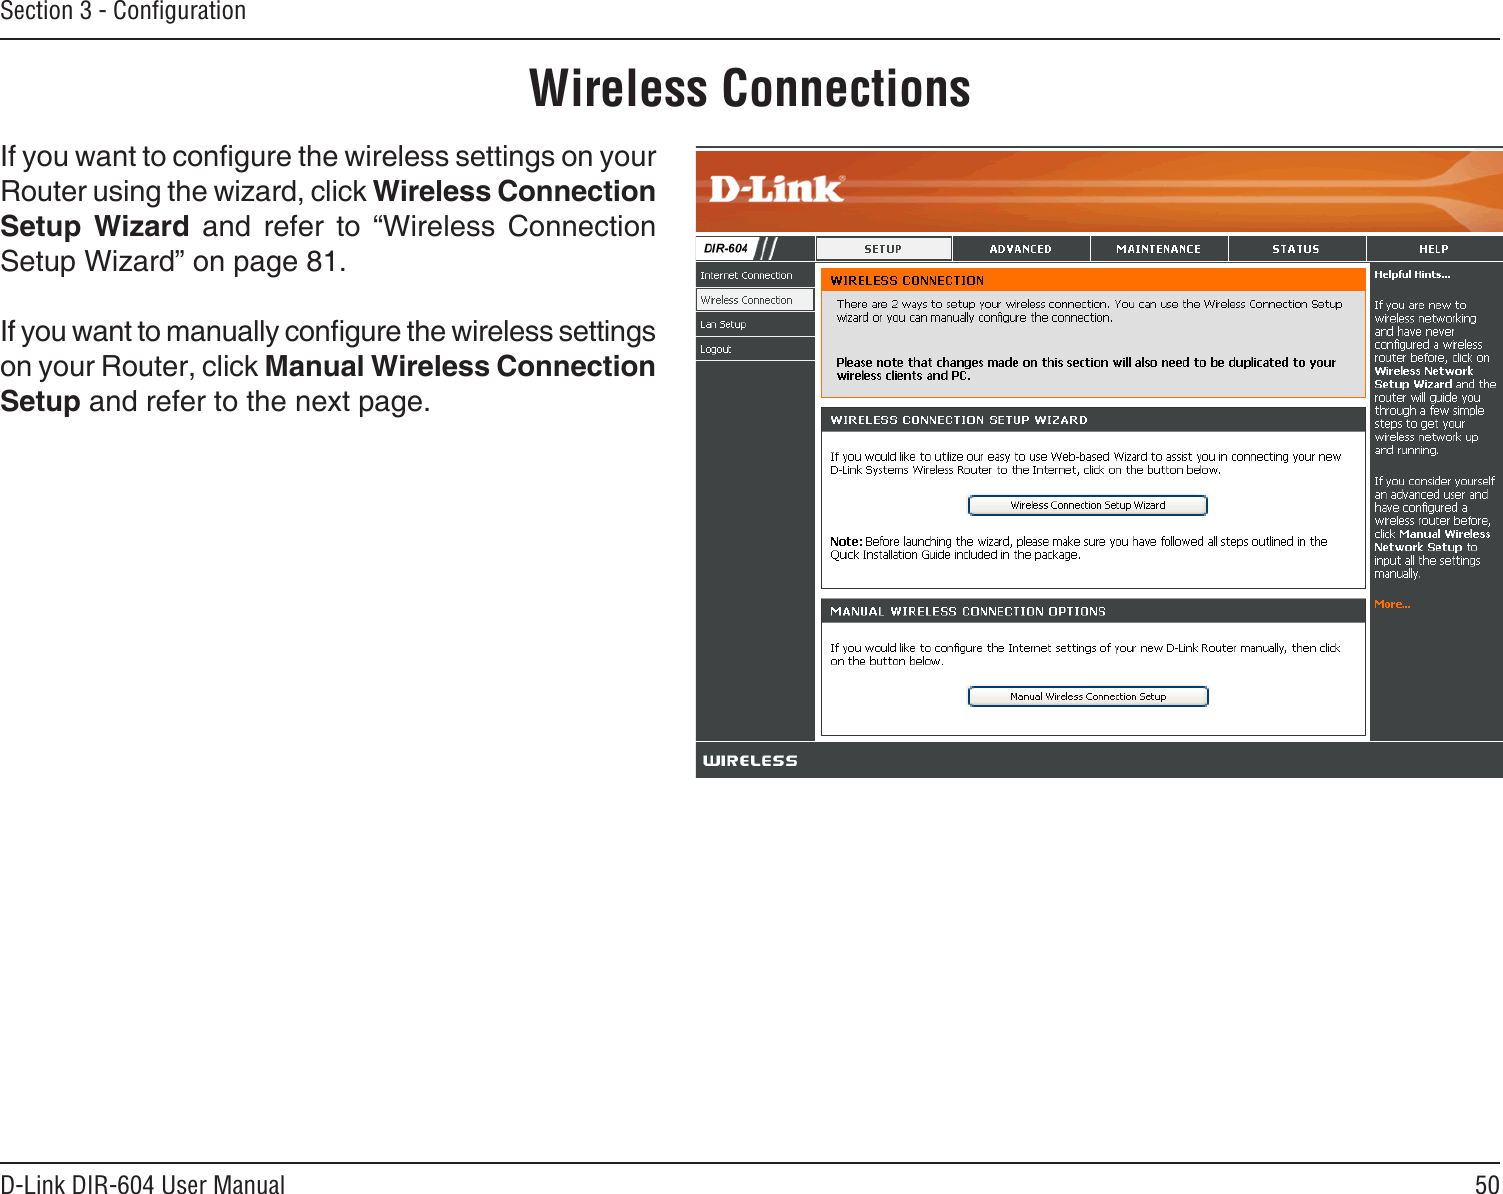 50D-Link DIR-604 User ManualSection 3 - ConﬁgurationWireless ConnectionsIf you want to congure the wireless settings on your Router using the wizard, click Wireless Connection Setup  Wizard  and  refer  to  “Wireless  Connection Setup Wizard” on page 81.If you want to manually congure the wireless settings on your Router, click Manual Wireless Connection Setup and refer to the next page.